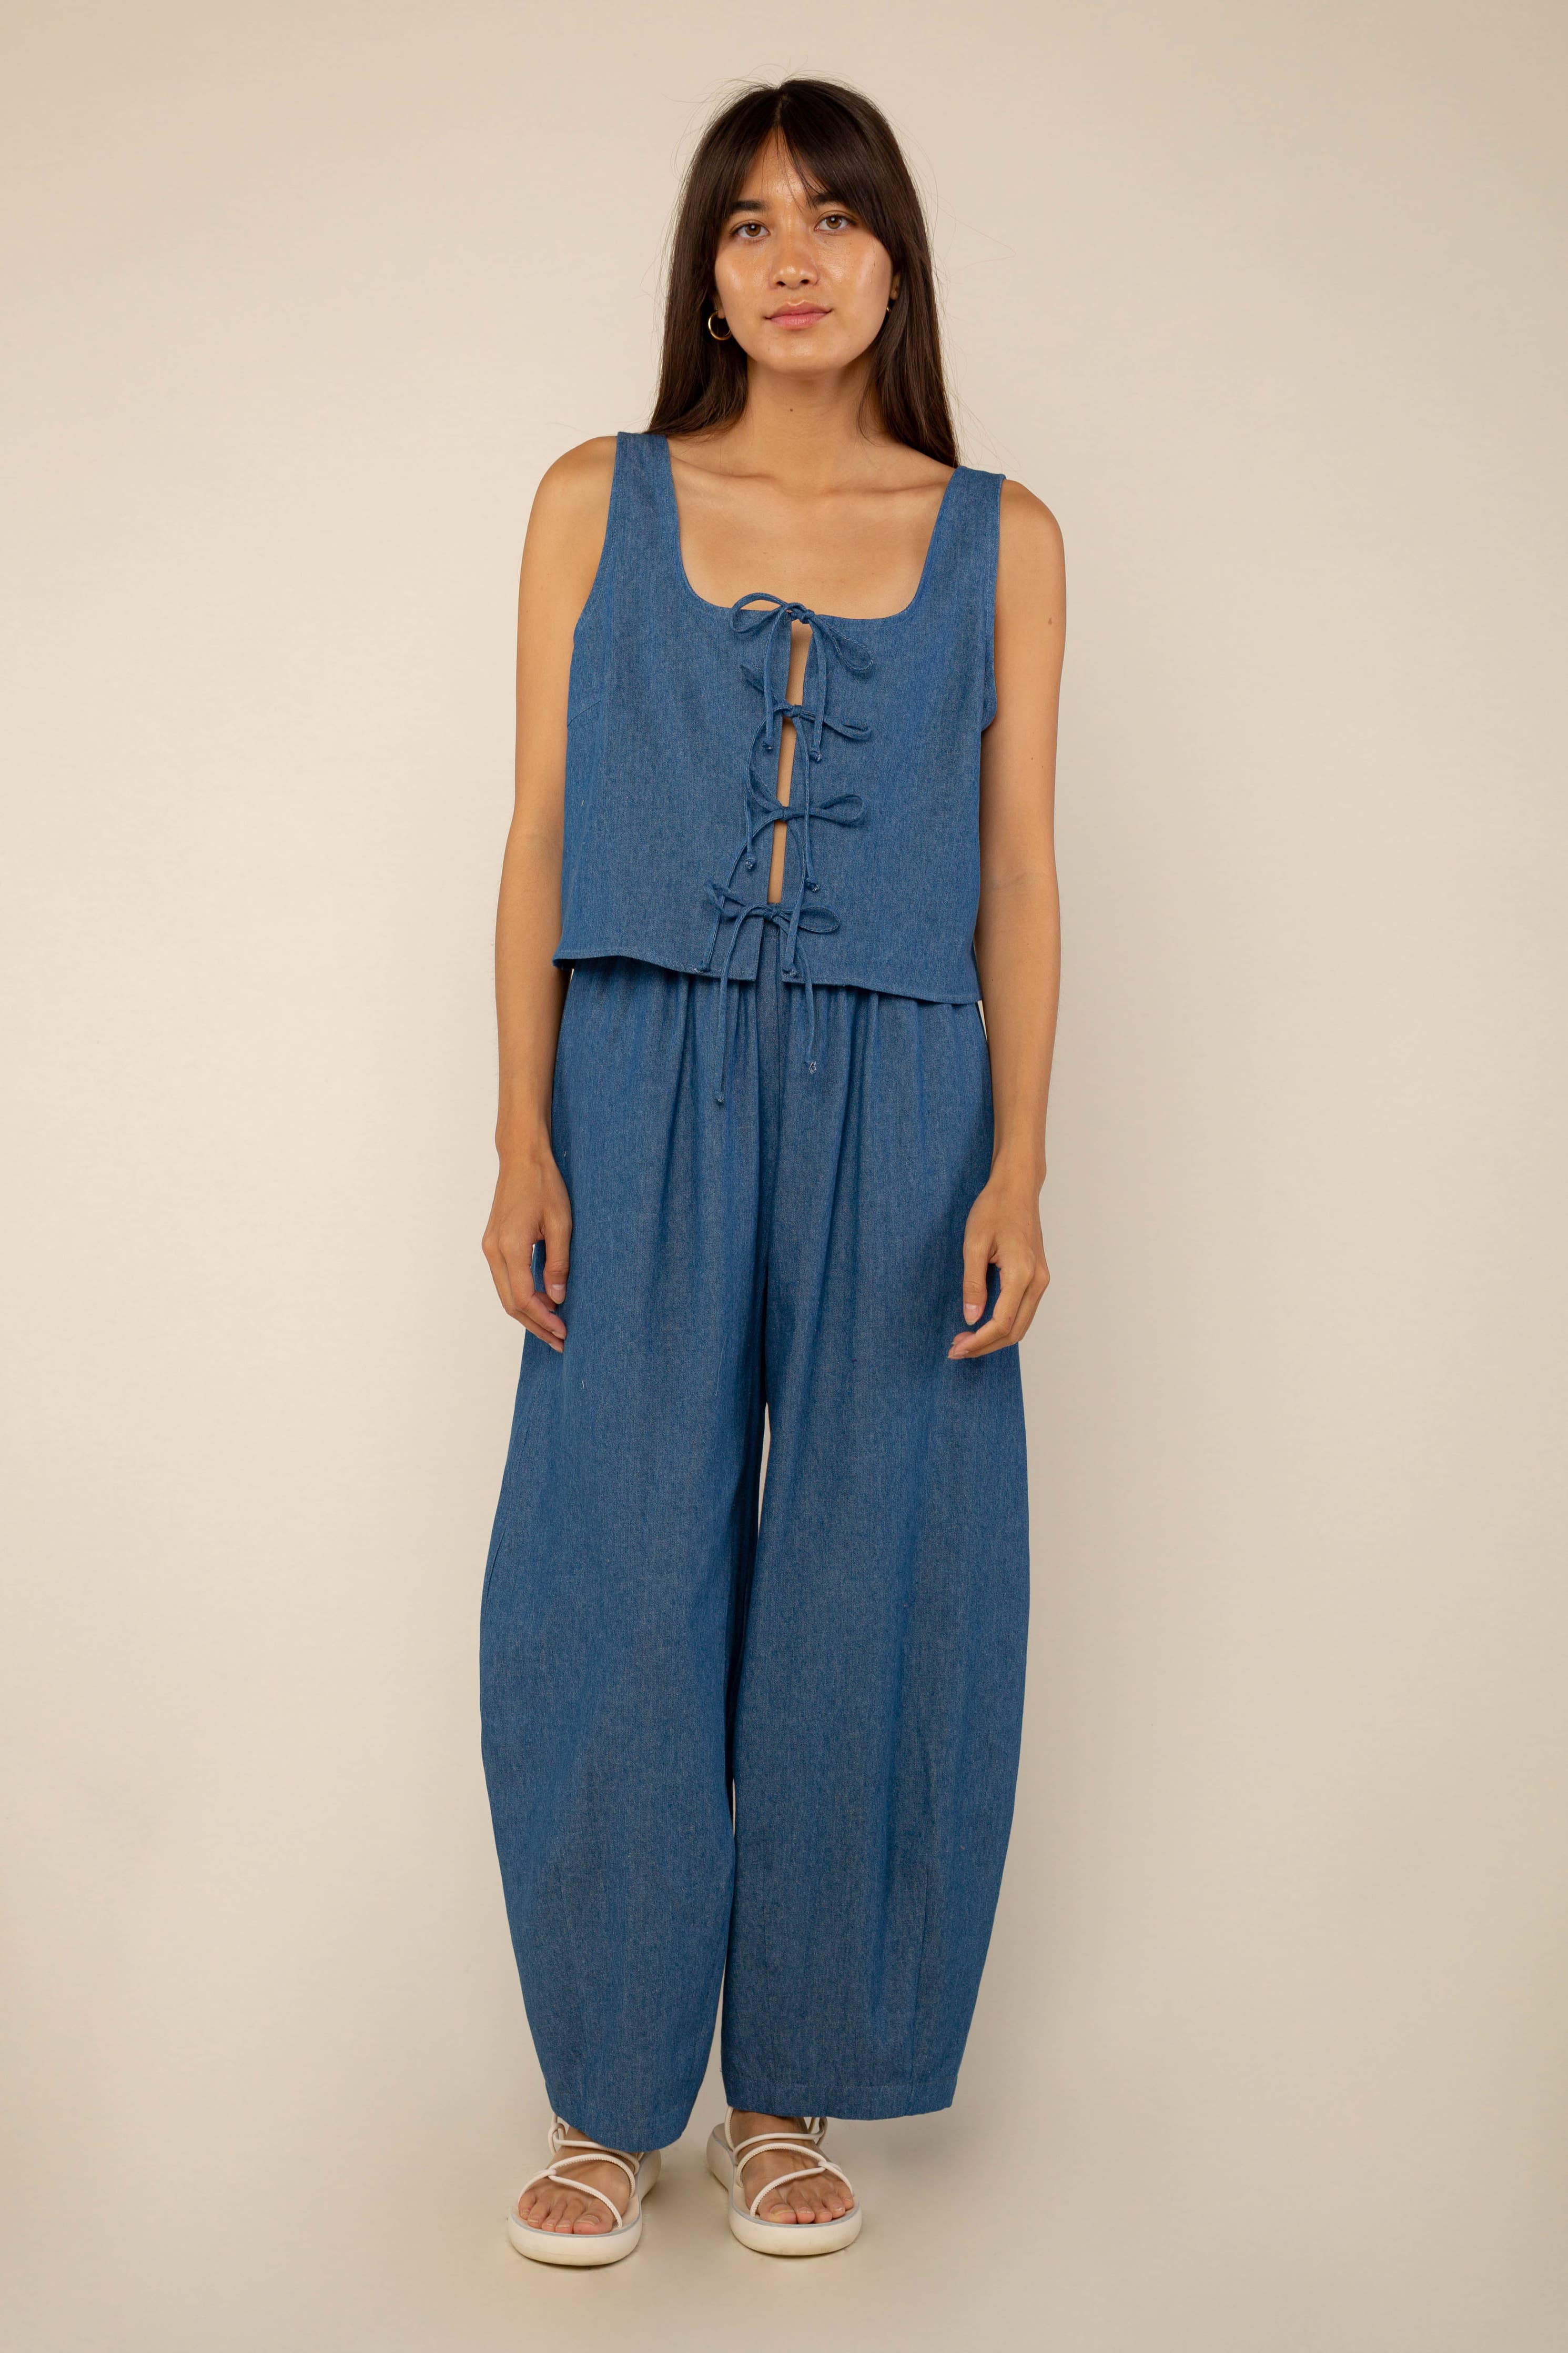 Denim Lantern Pant - Out of the Blue